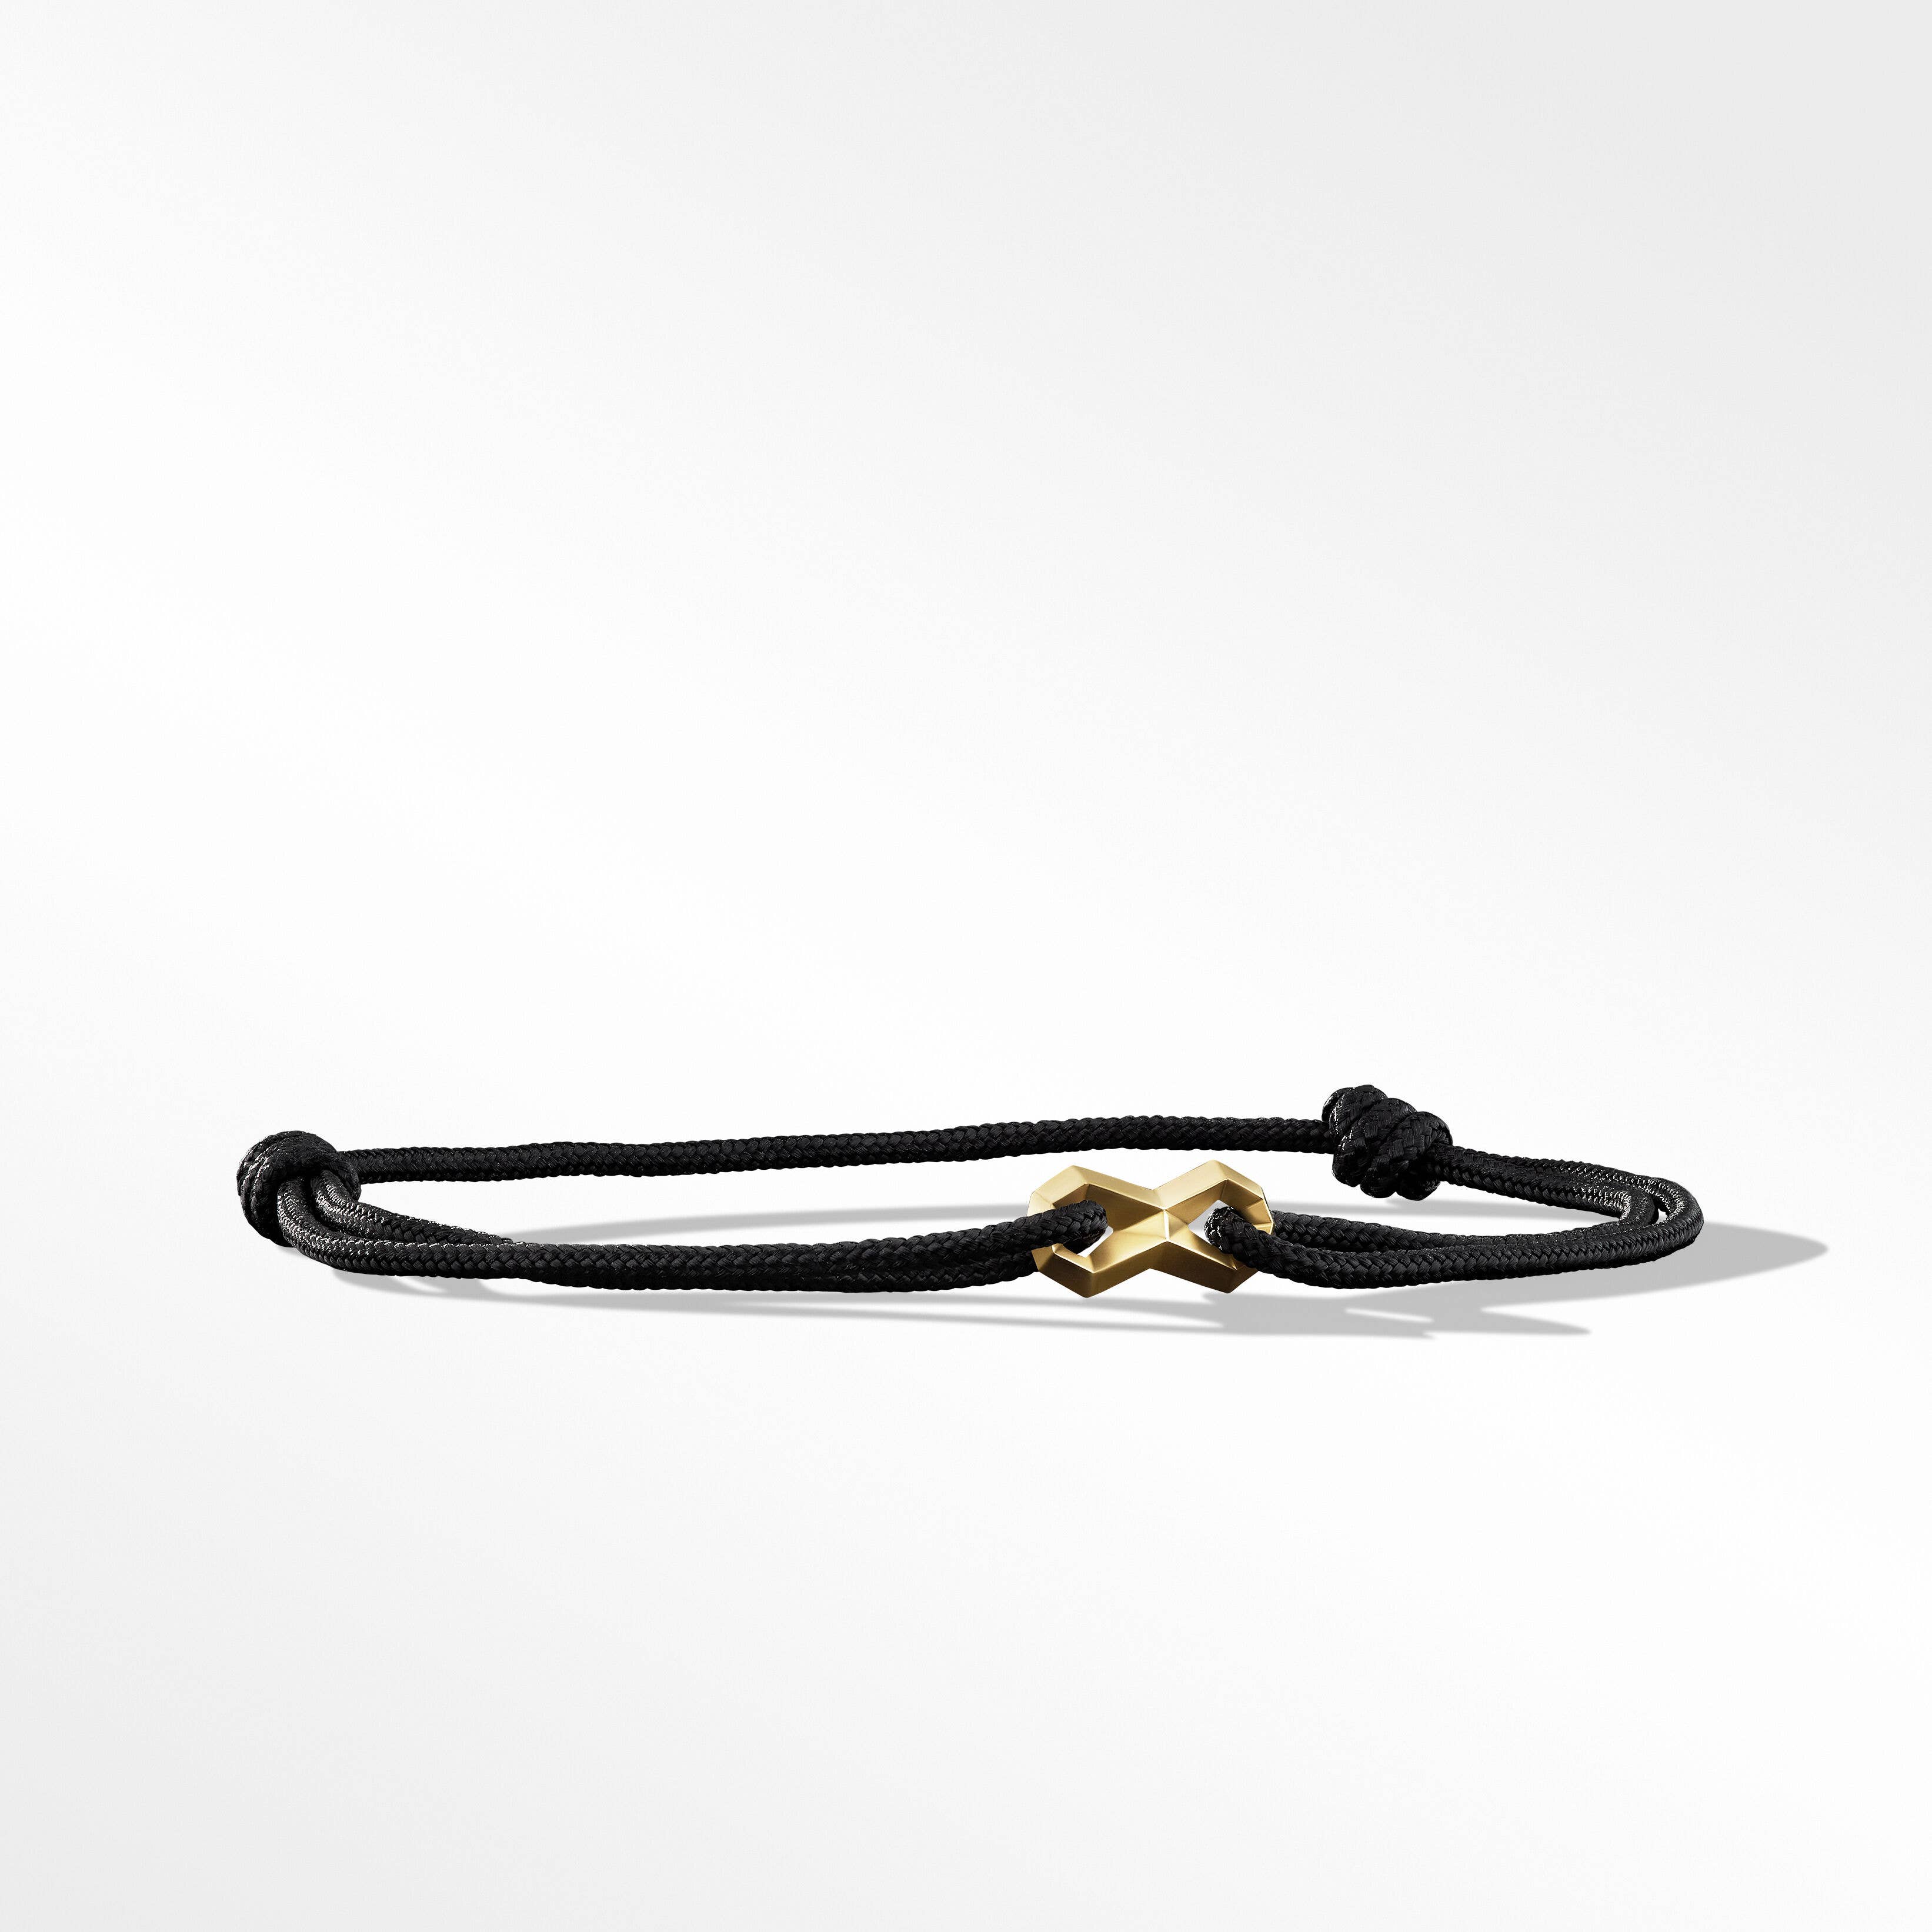 Infinity Link Cord Bracelet with 18K Yellow Gold, 9mm